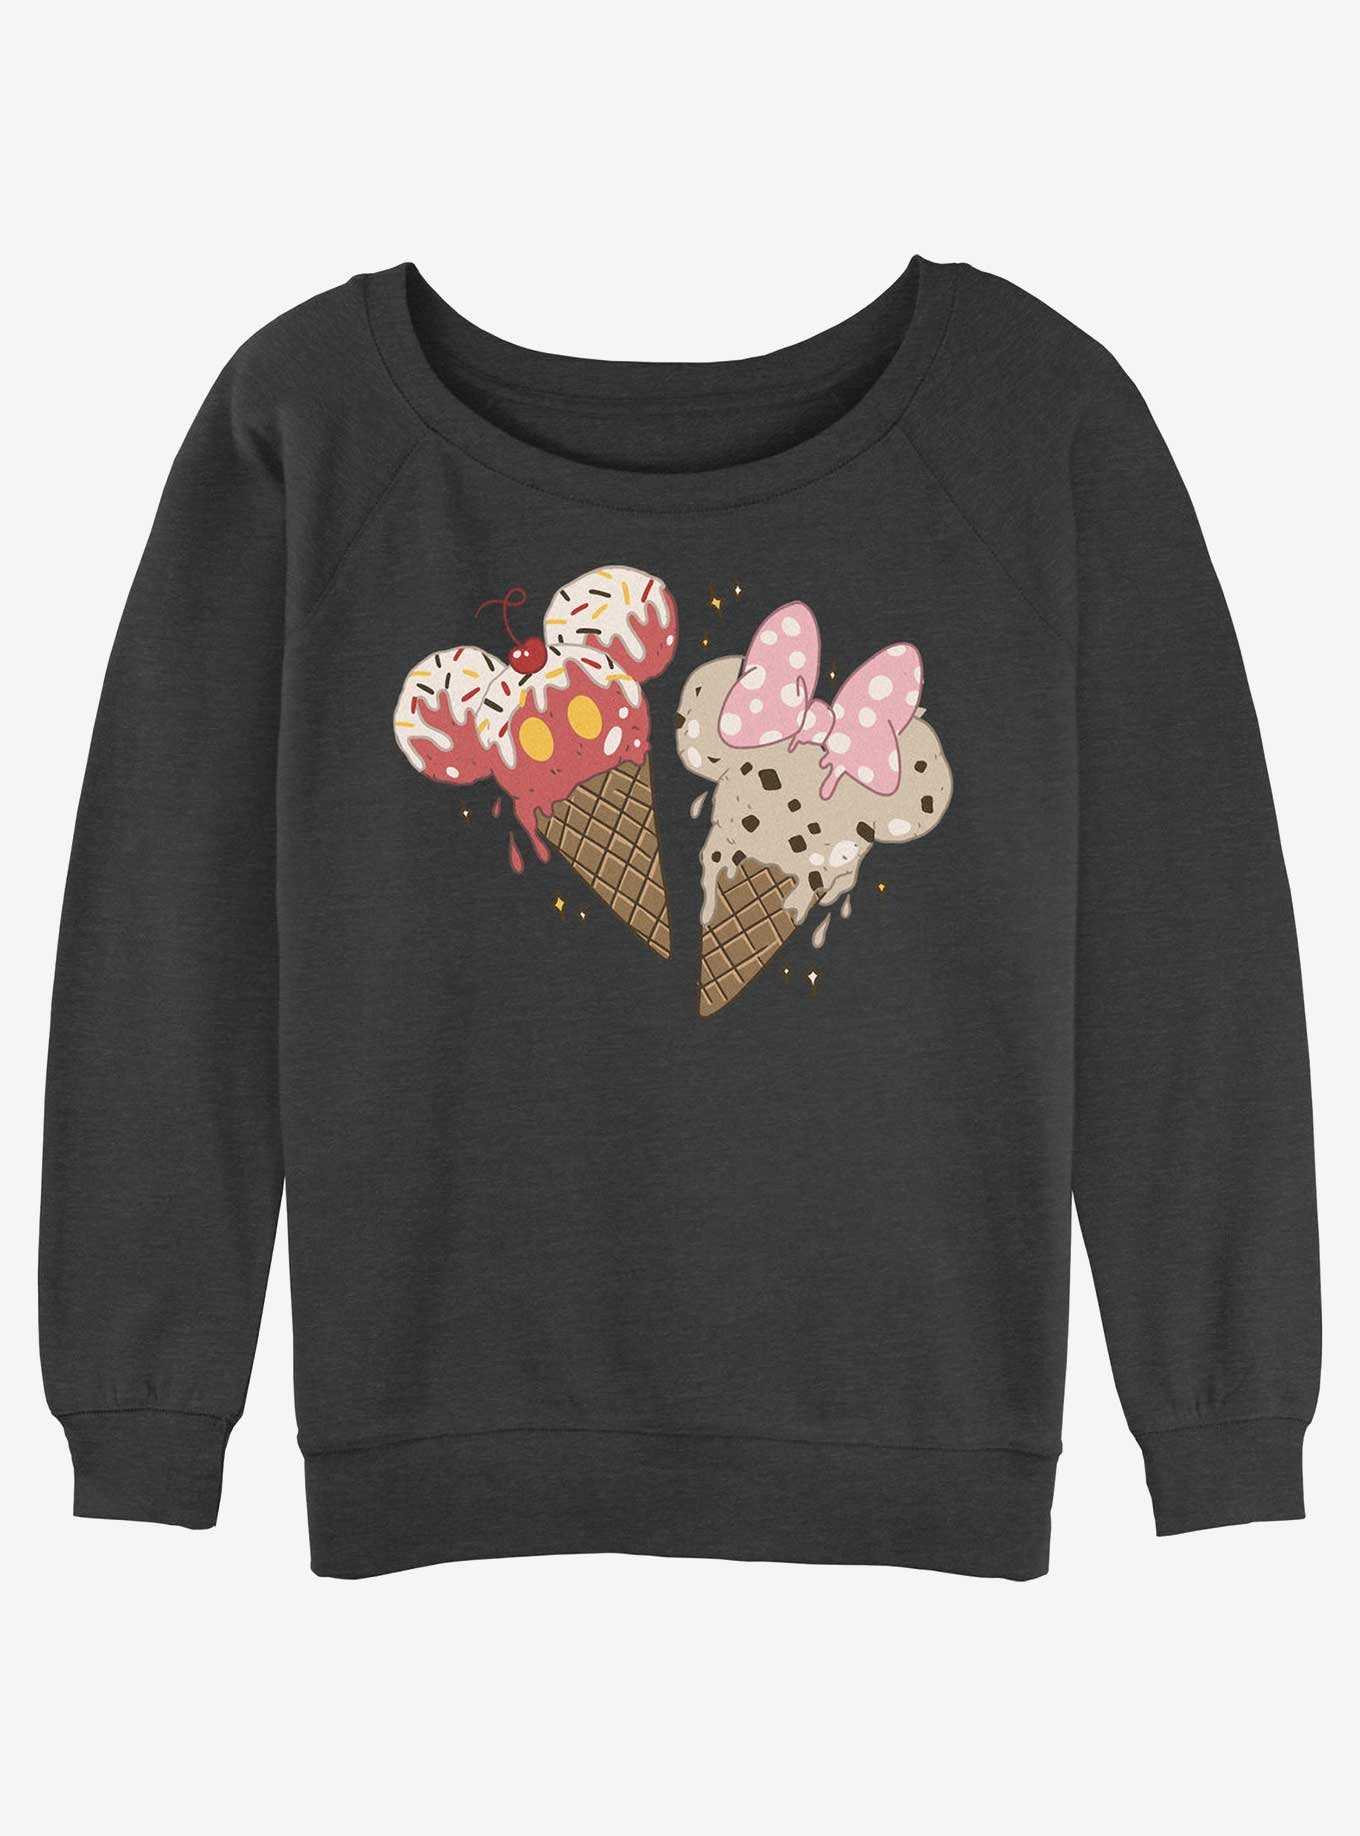 Disney Mickey Mouse & Minnie Mouse Ice Cream Cones Girls Slouchy Sweatshirt, , hi-res